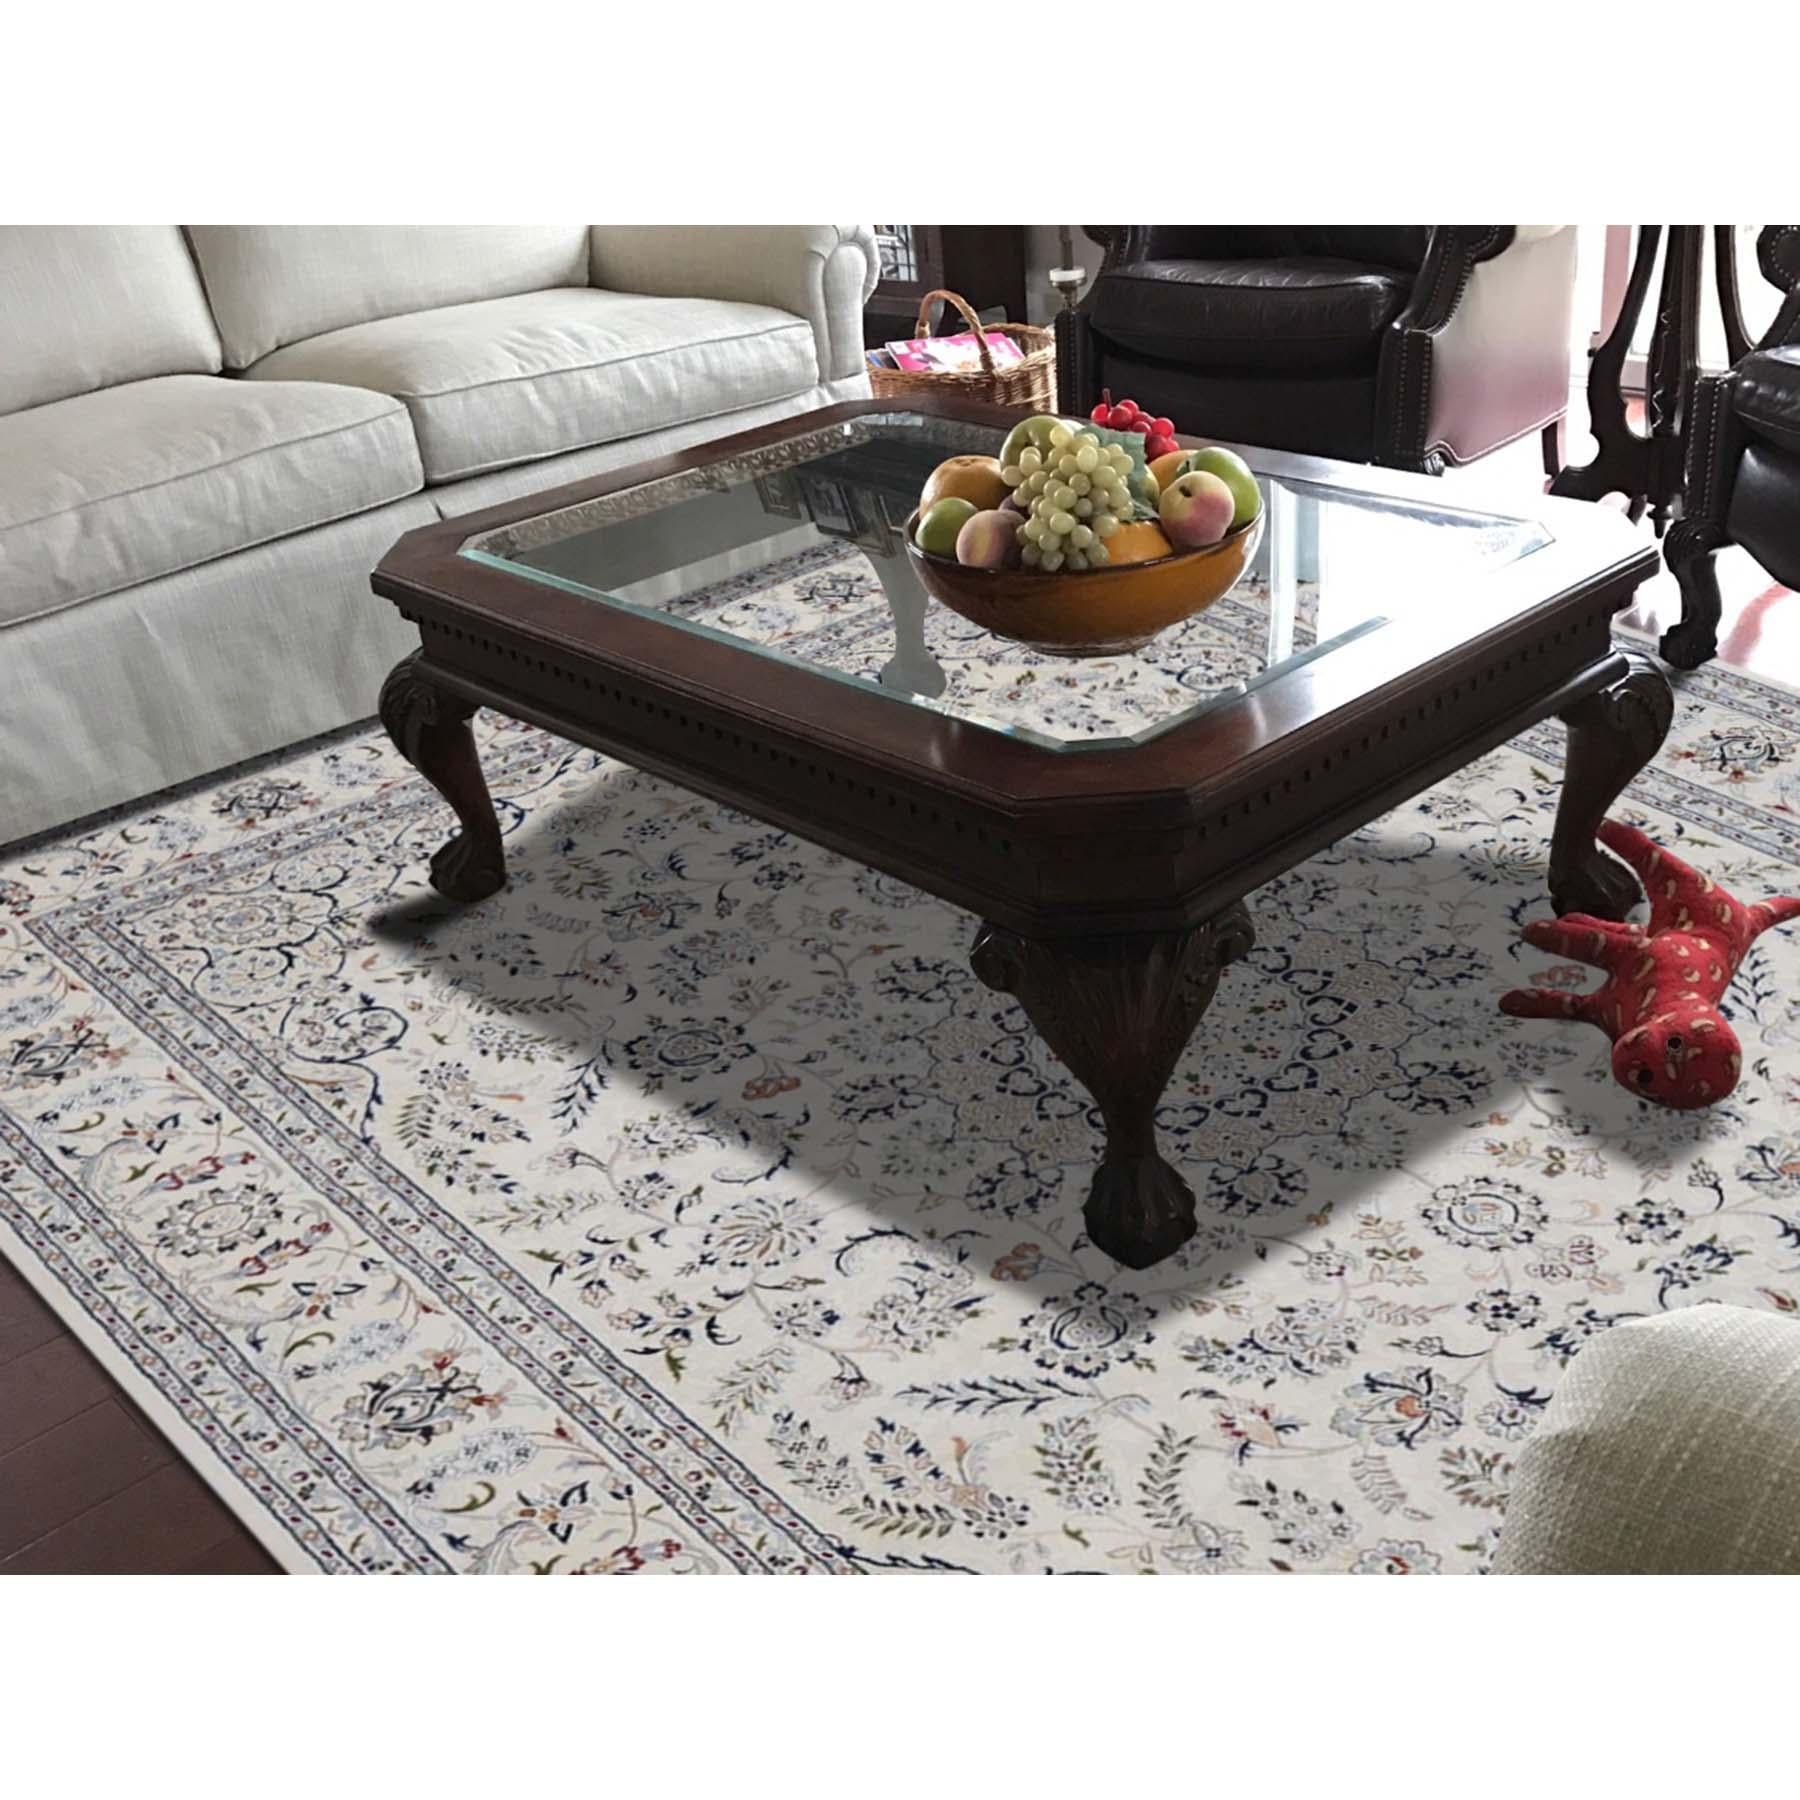 This is a truly genuine one-of-a-kind wool and silk 250 Kpsi ivory Nain hand knotted Oriental rug. It has been knotted for months and months in the centuries-old Persian weaving craftsmanship techniques by expert artisans. Measures: 8'6